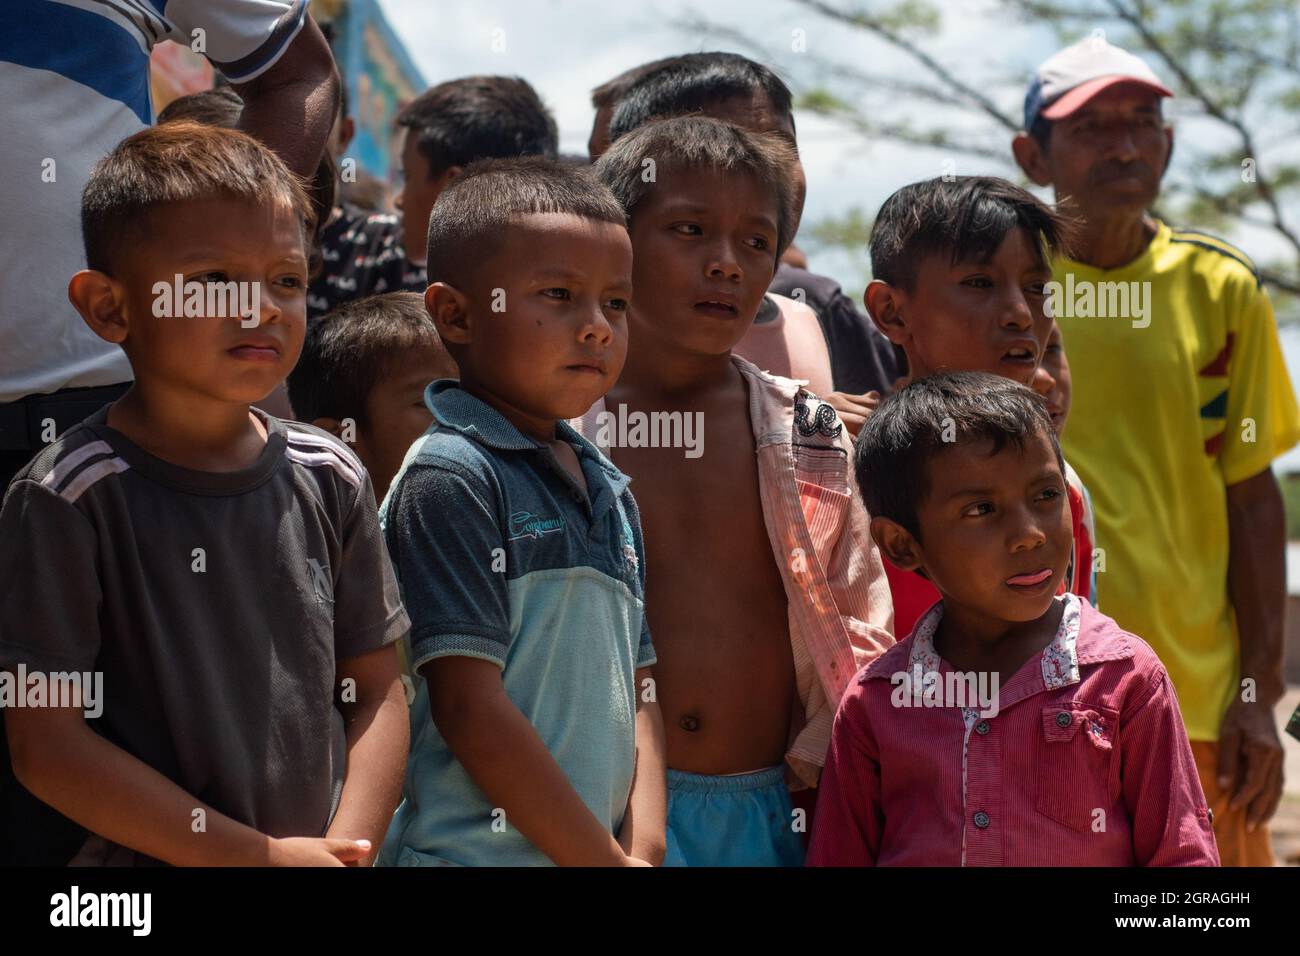 Mayapo, Colombia. 26th Sep, 2021. Wayuu indigenous kids wait patiently for drinkable water to be distributed during a Humanitarian Mission developed by 'De Corazon Guajira' in Mayapo at La Guajira - Colombia were they visited the Wayuu indigenous communities 'Pactalia, Poromana, Perrohuila' on September 26, 2021. The Guajira region in Colombia is the poorest region in Colombia, with its people commongly living without drinkable water, electricity and food. Credit: Long Visual Press/Alamy Live News Stock Photo